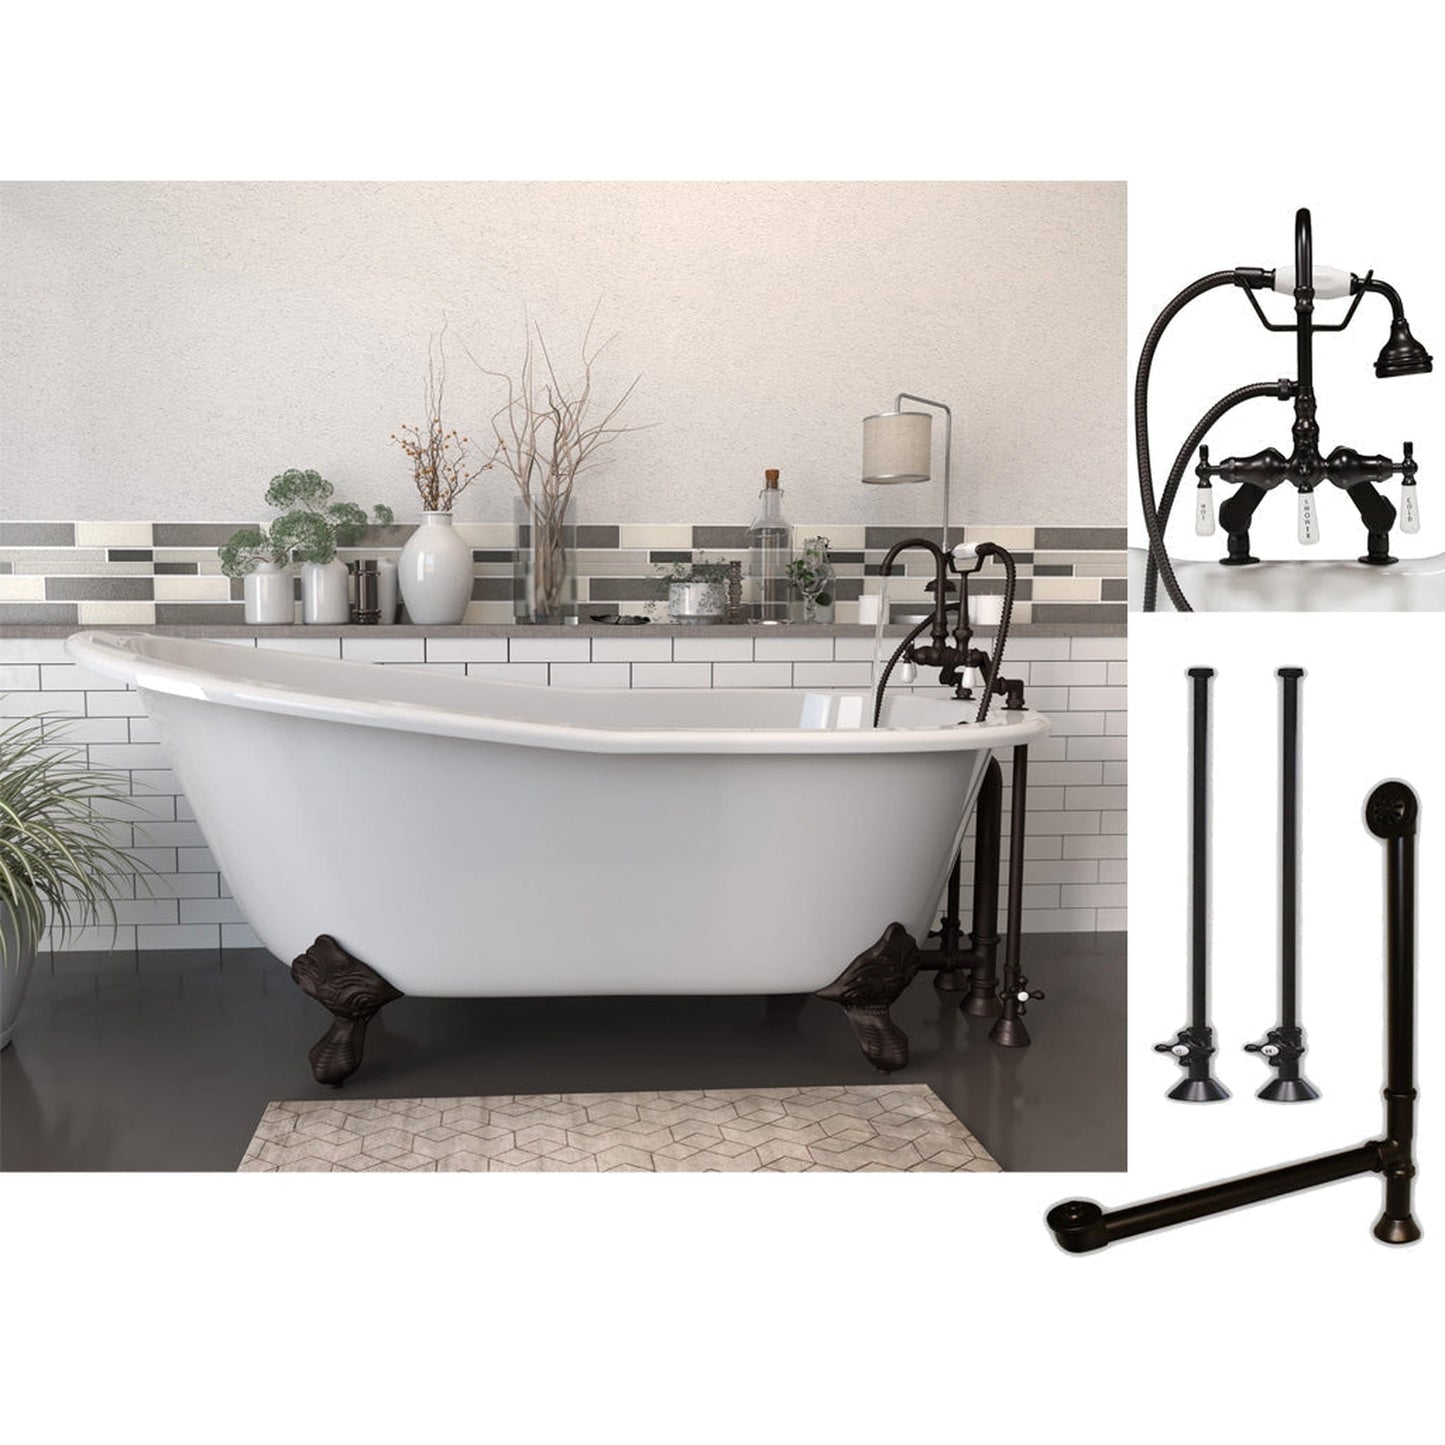 Cambridge Plumbing 61" White Cast Iron Clawfoot Bathtub With Deck Holes And Complete Plumbing Package Including Porcelain Lever English Telephone Brass Faucet, Supply Lines, Drain And Overflow Assembly In Oil Rubbed Bronze